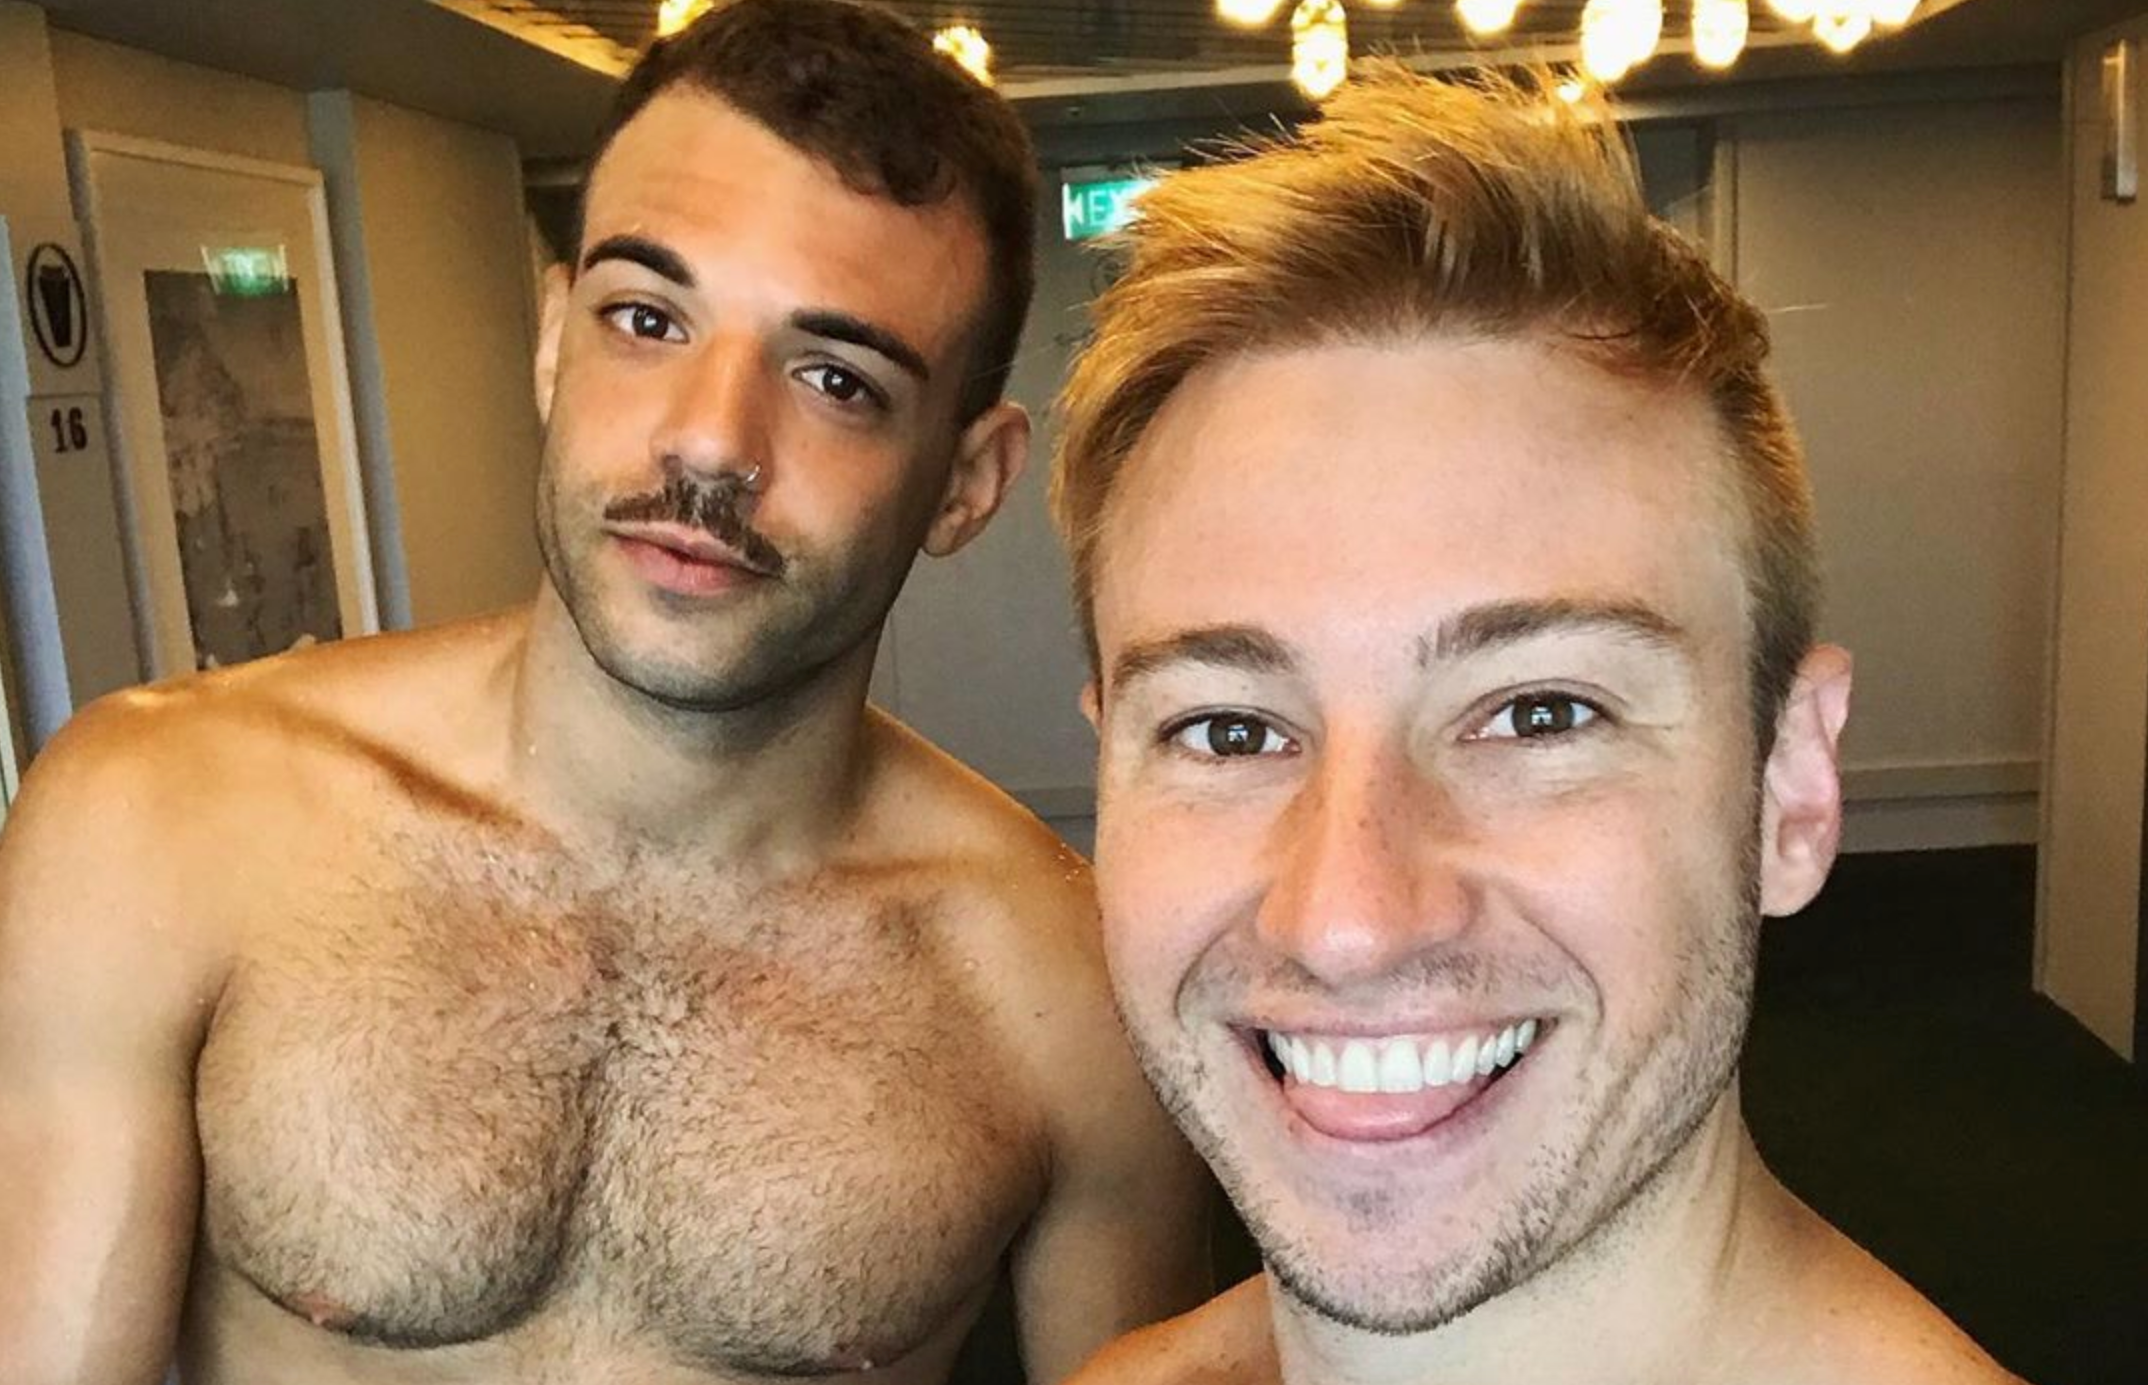 ‘He got down on both knees’: Matthew Mitcham announces engagement in cheeky post